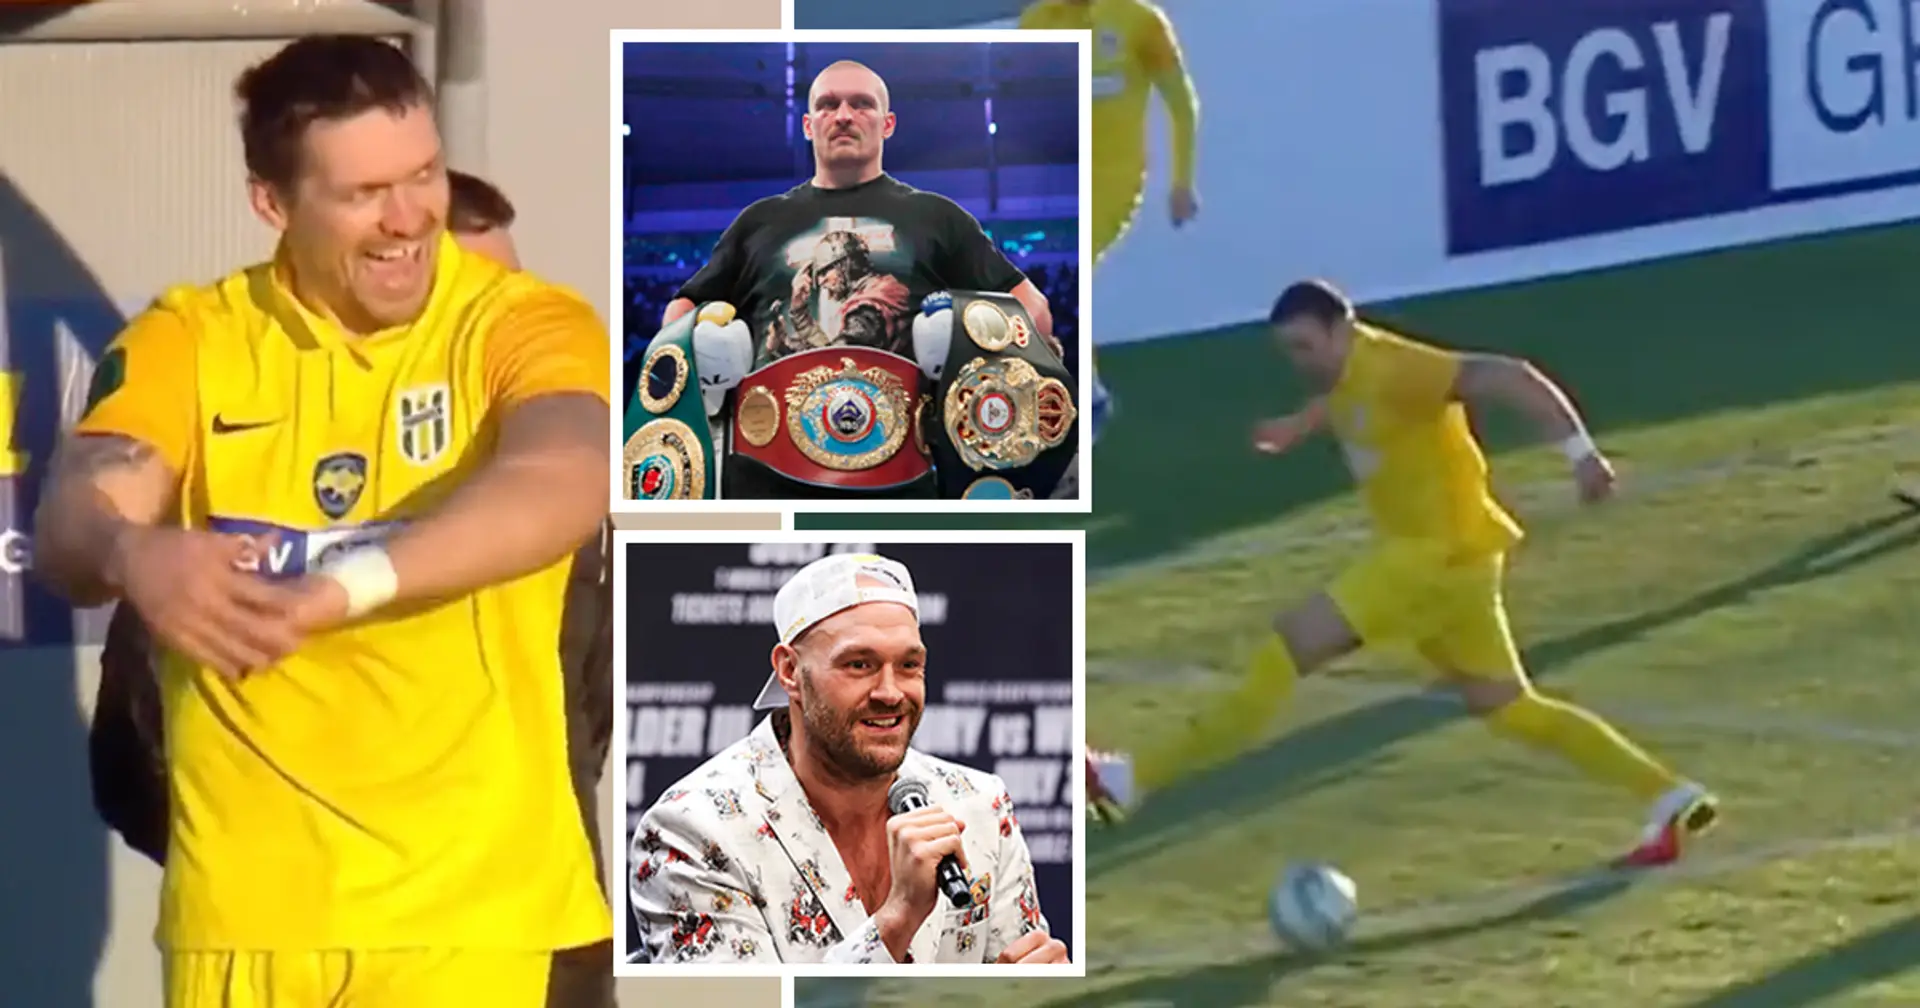 Heavyweight boxing champion Oleksandr Usyk makes his professional football debut for Ukrainian side, had a great chance to score